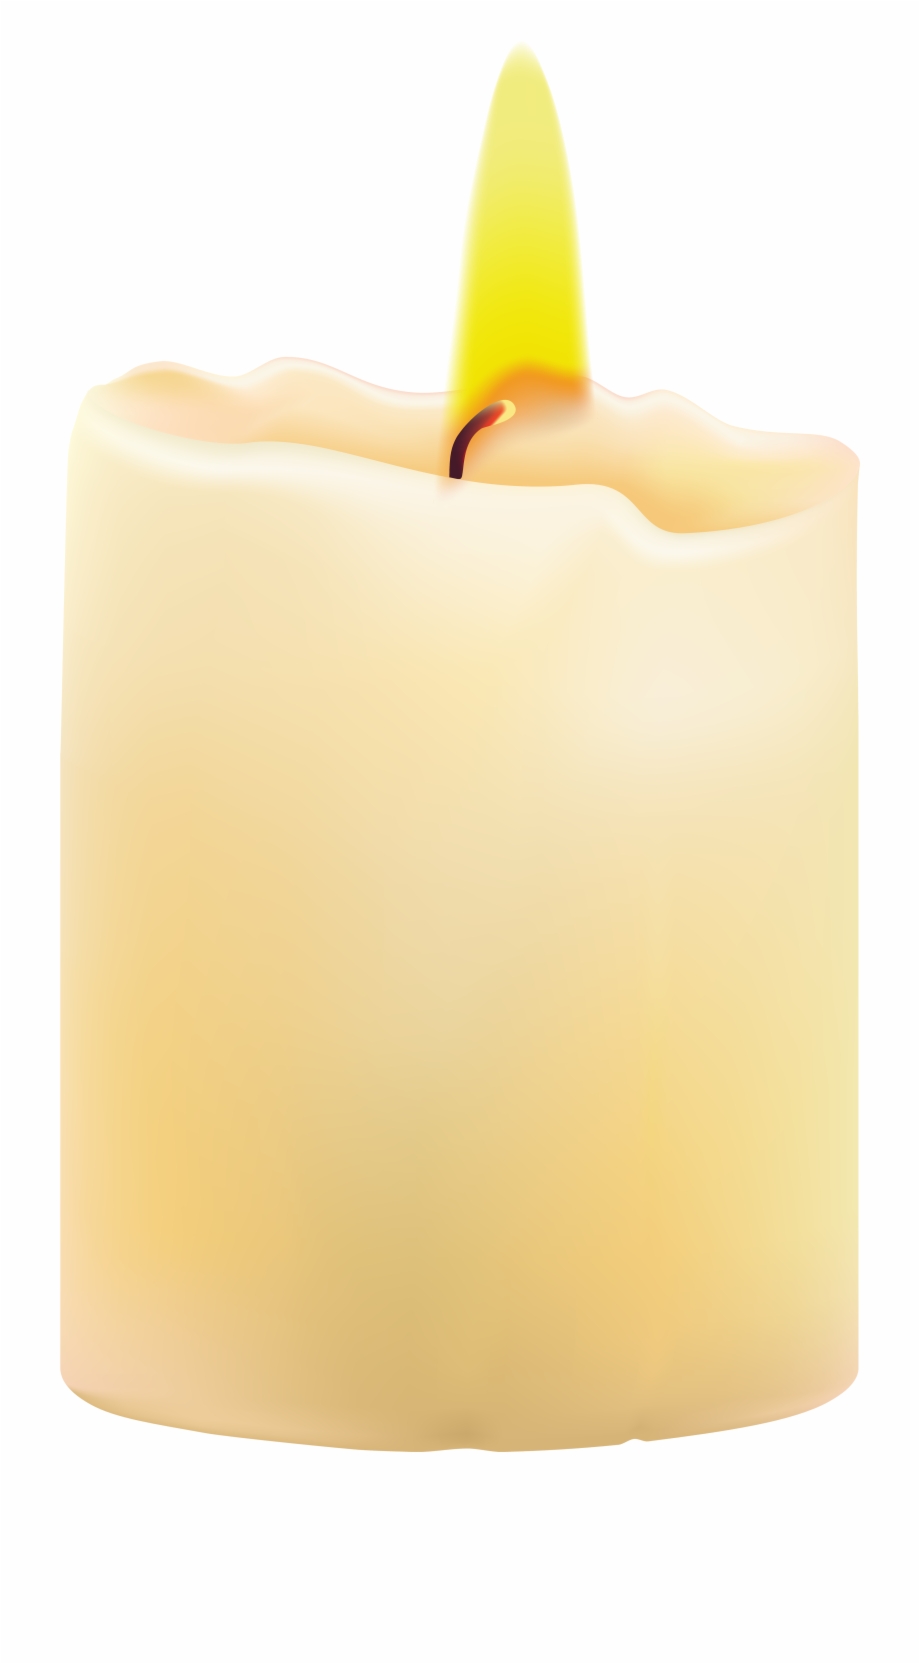 Church Candles Png : Download the perfect church candle pictures ...